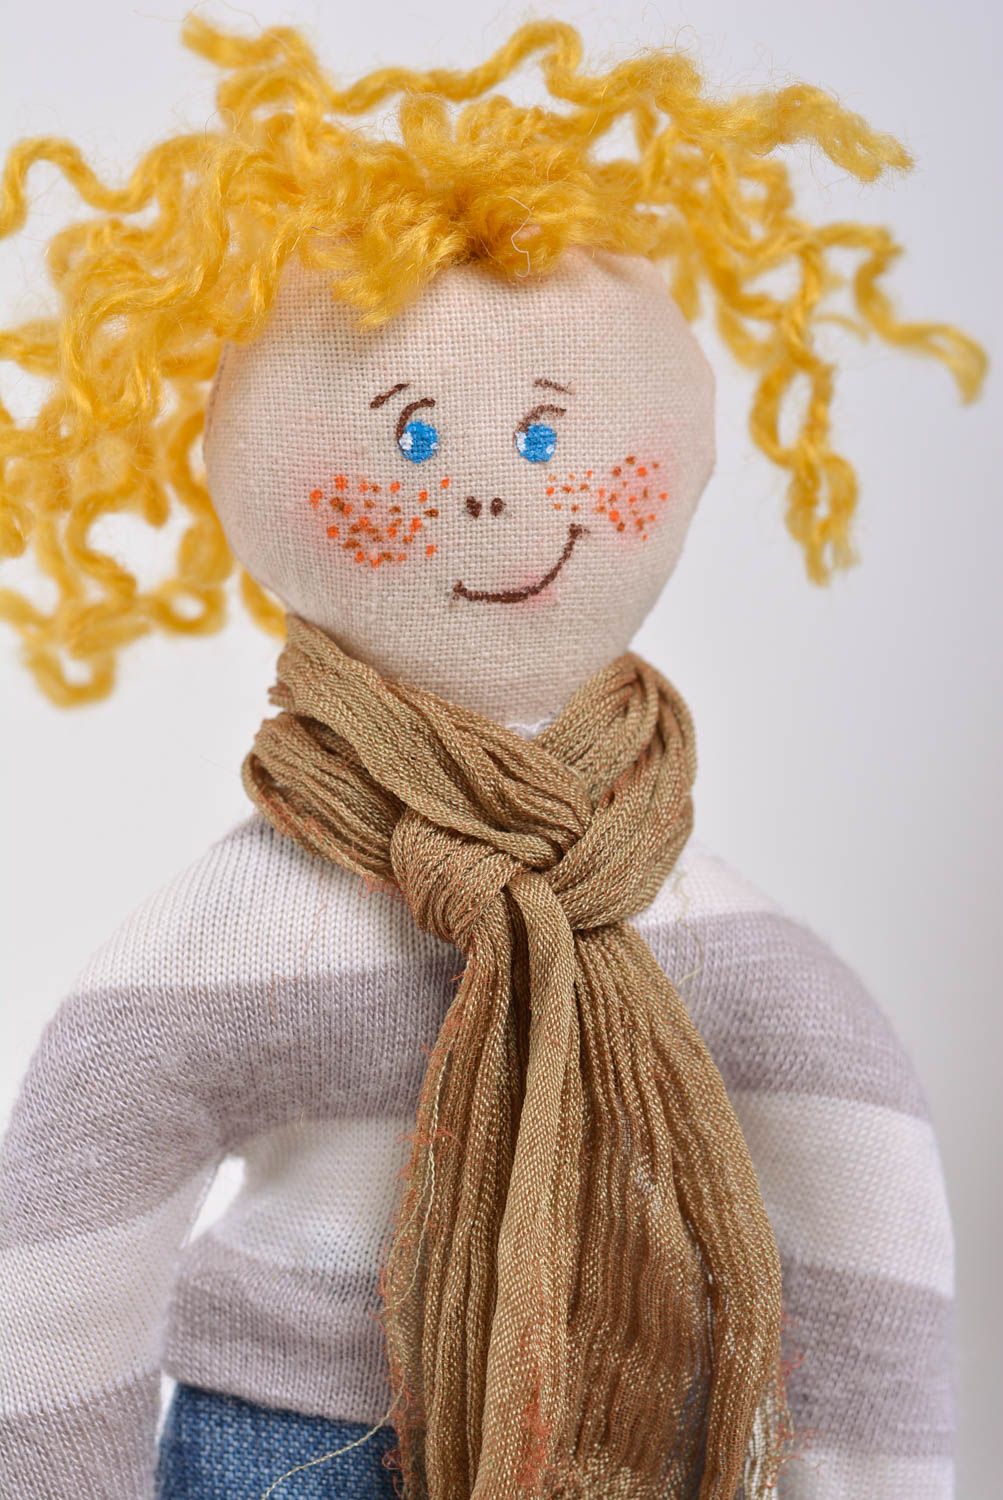 Handmade designer interior fabric soft toy boy with light curly hair in sweater photo 2